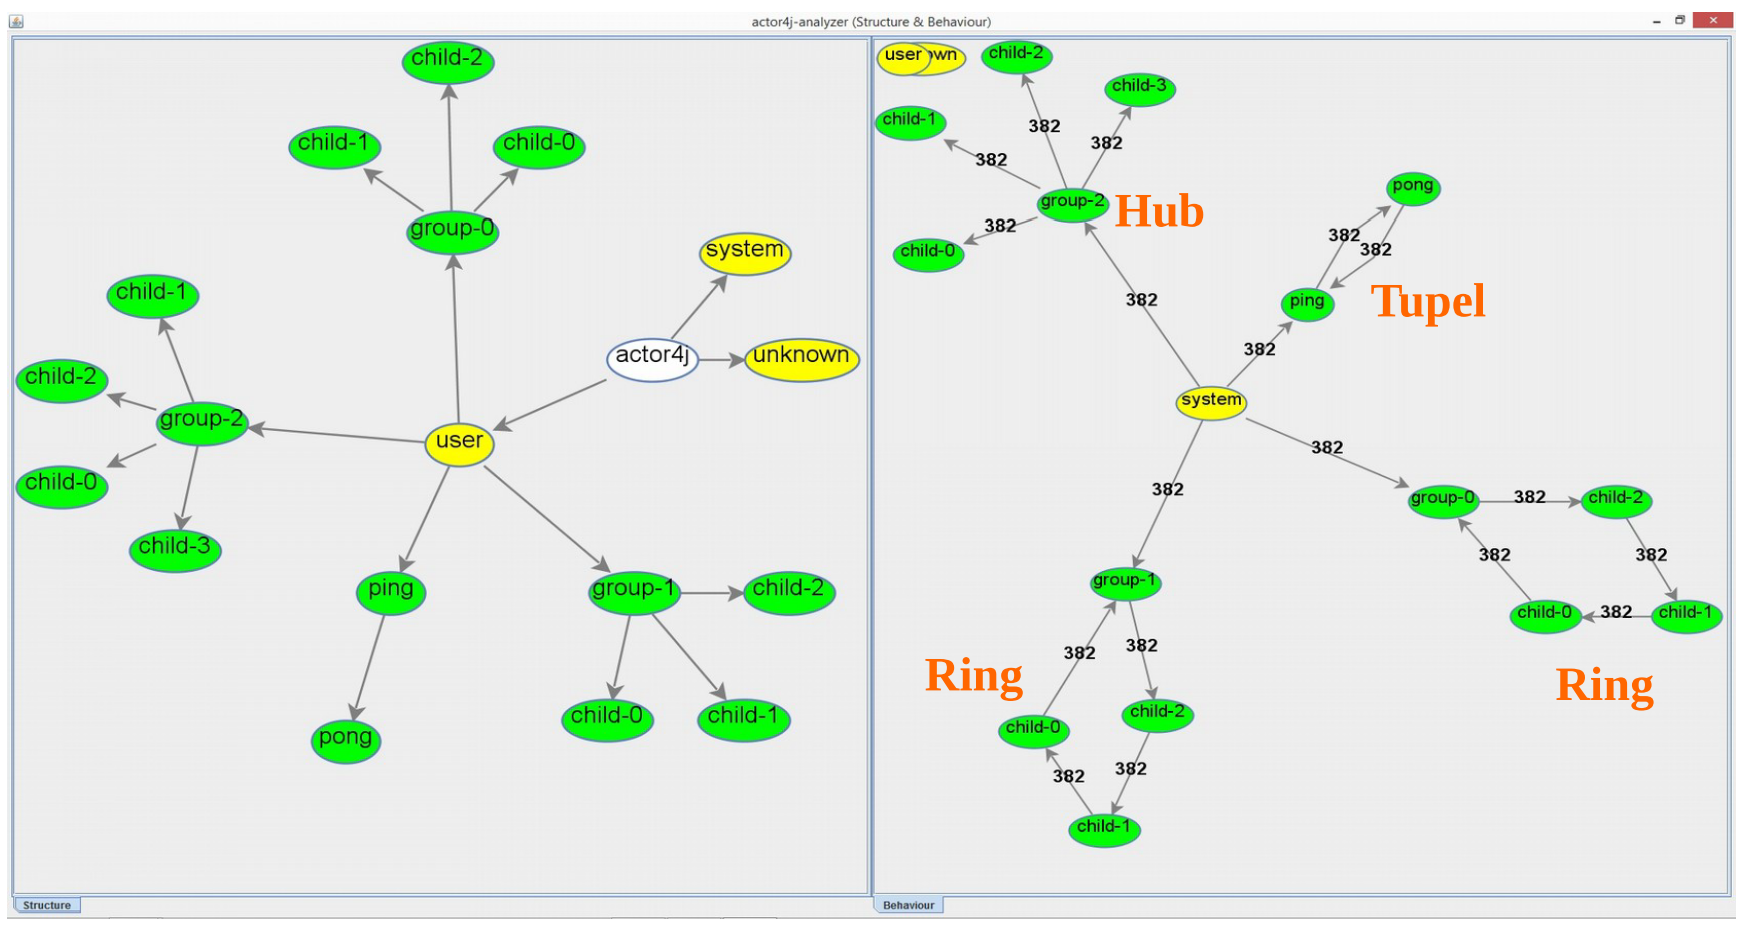 Representation of the analysis tool for actor4j